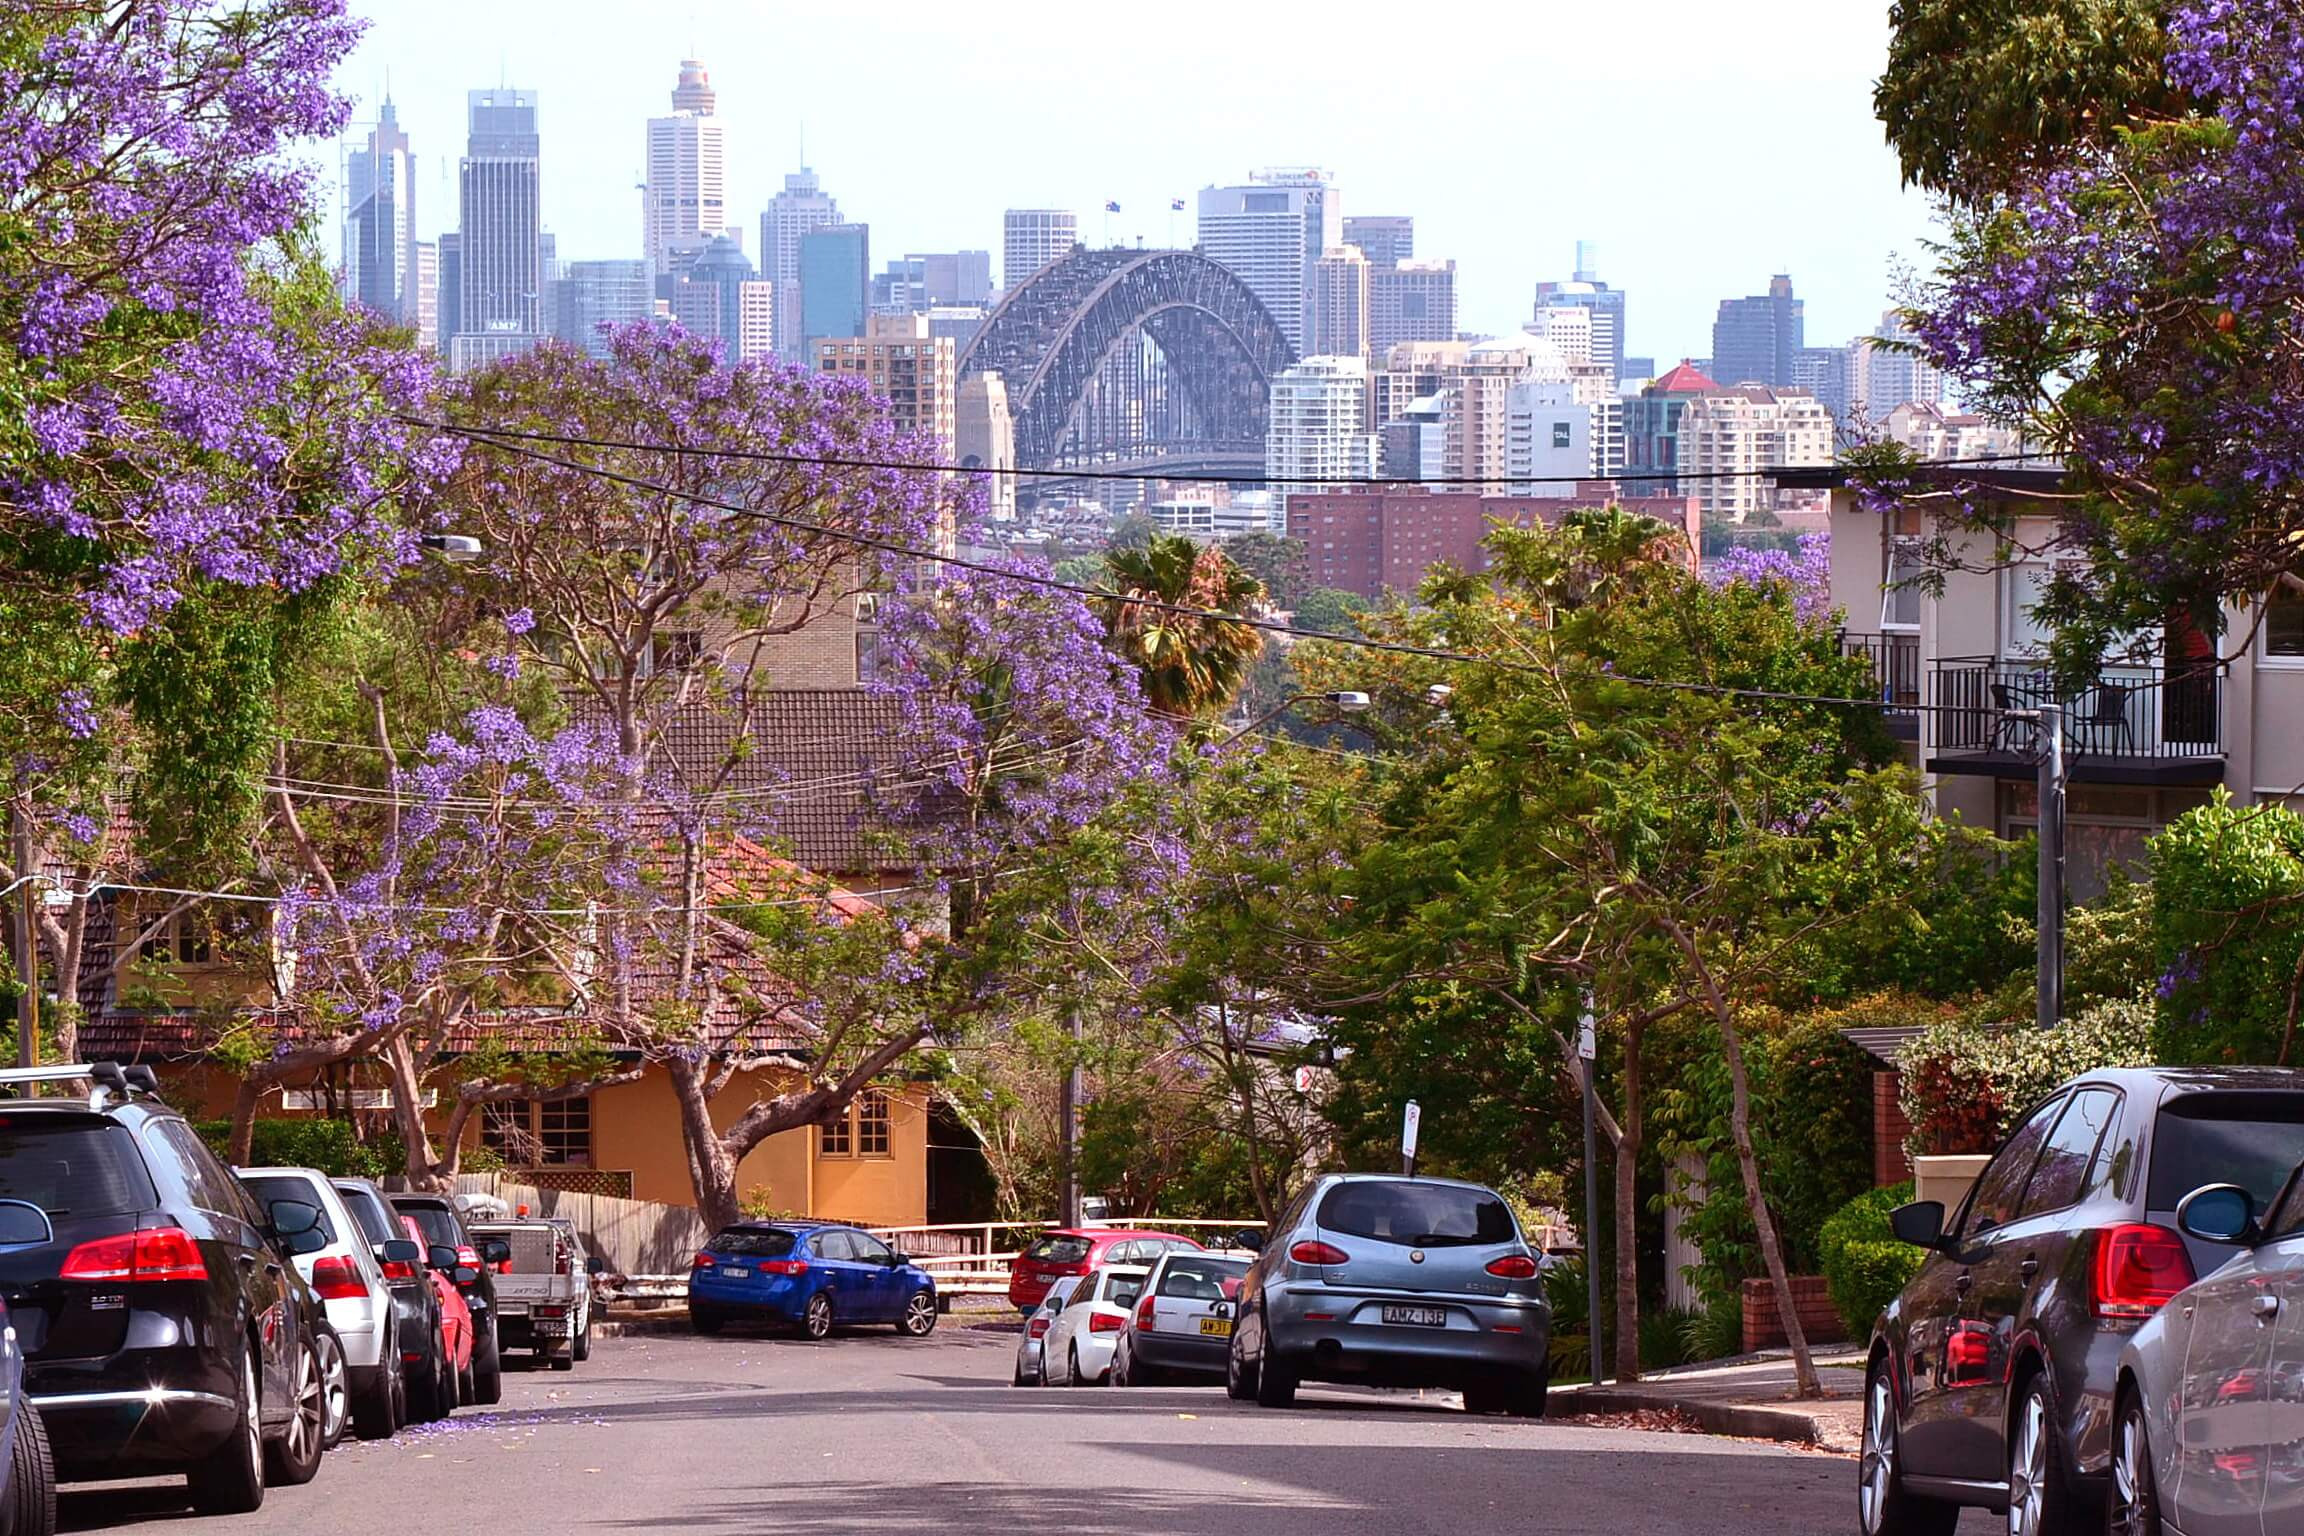 About Neutral Bay